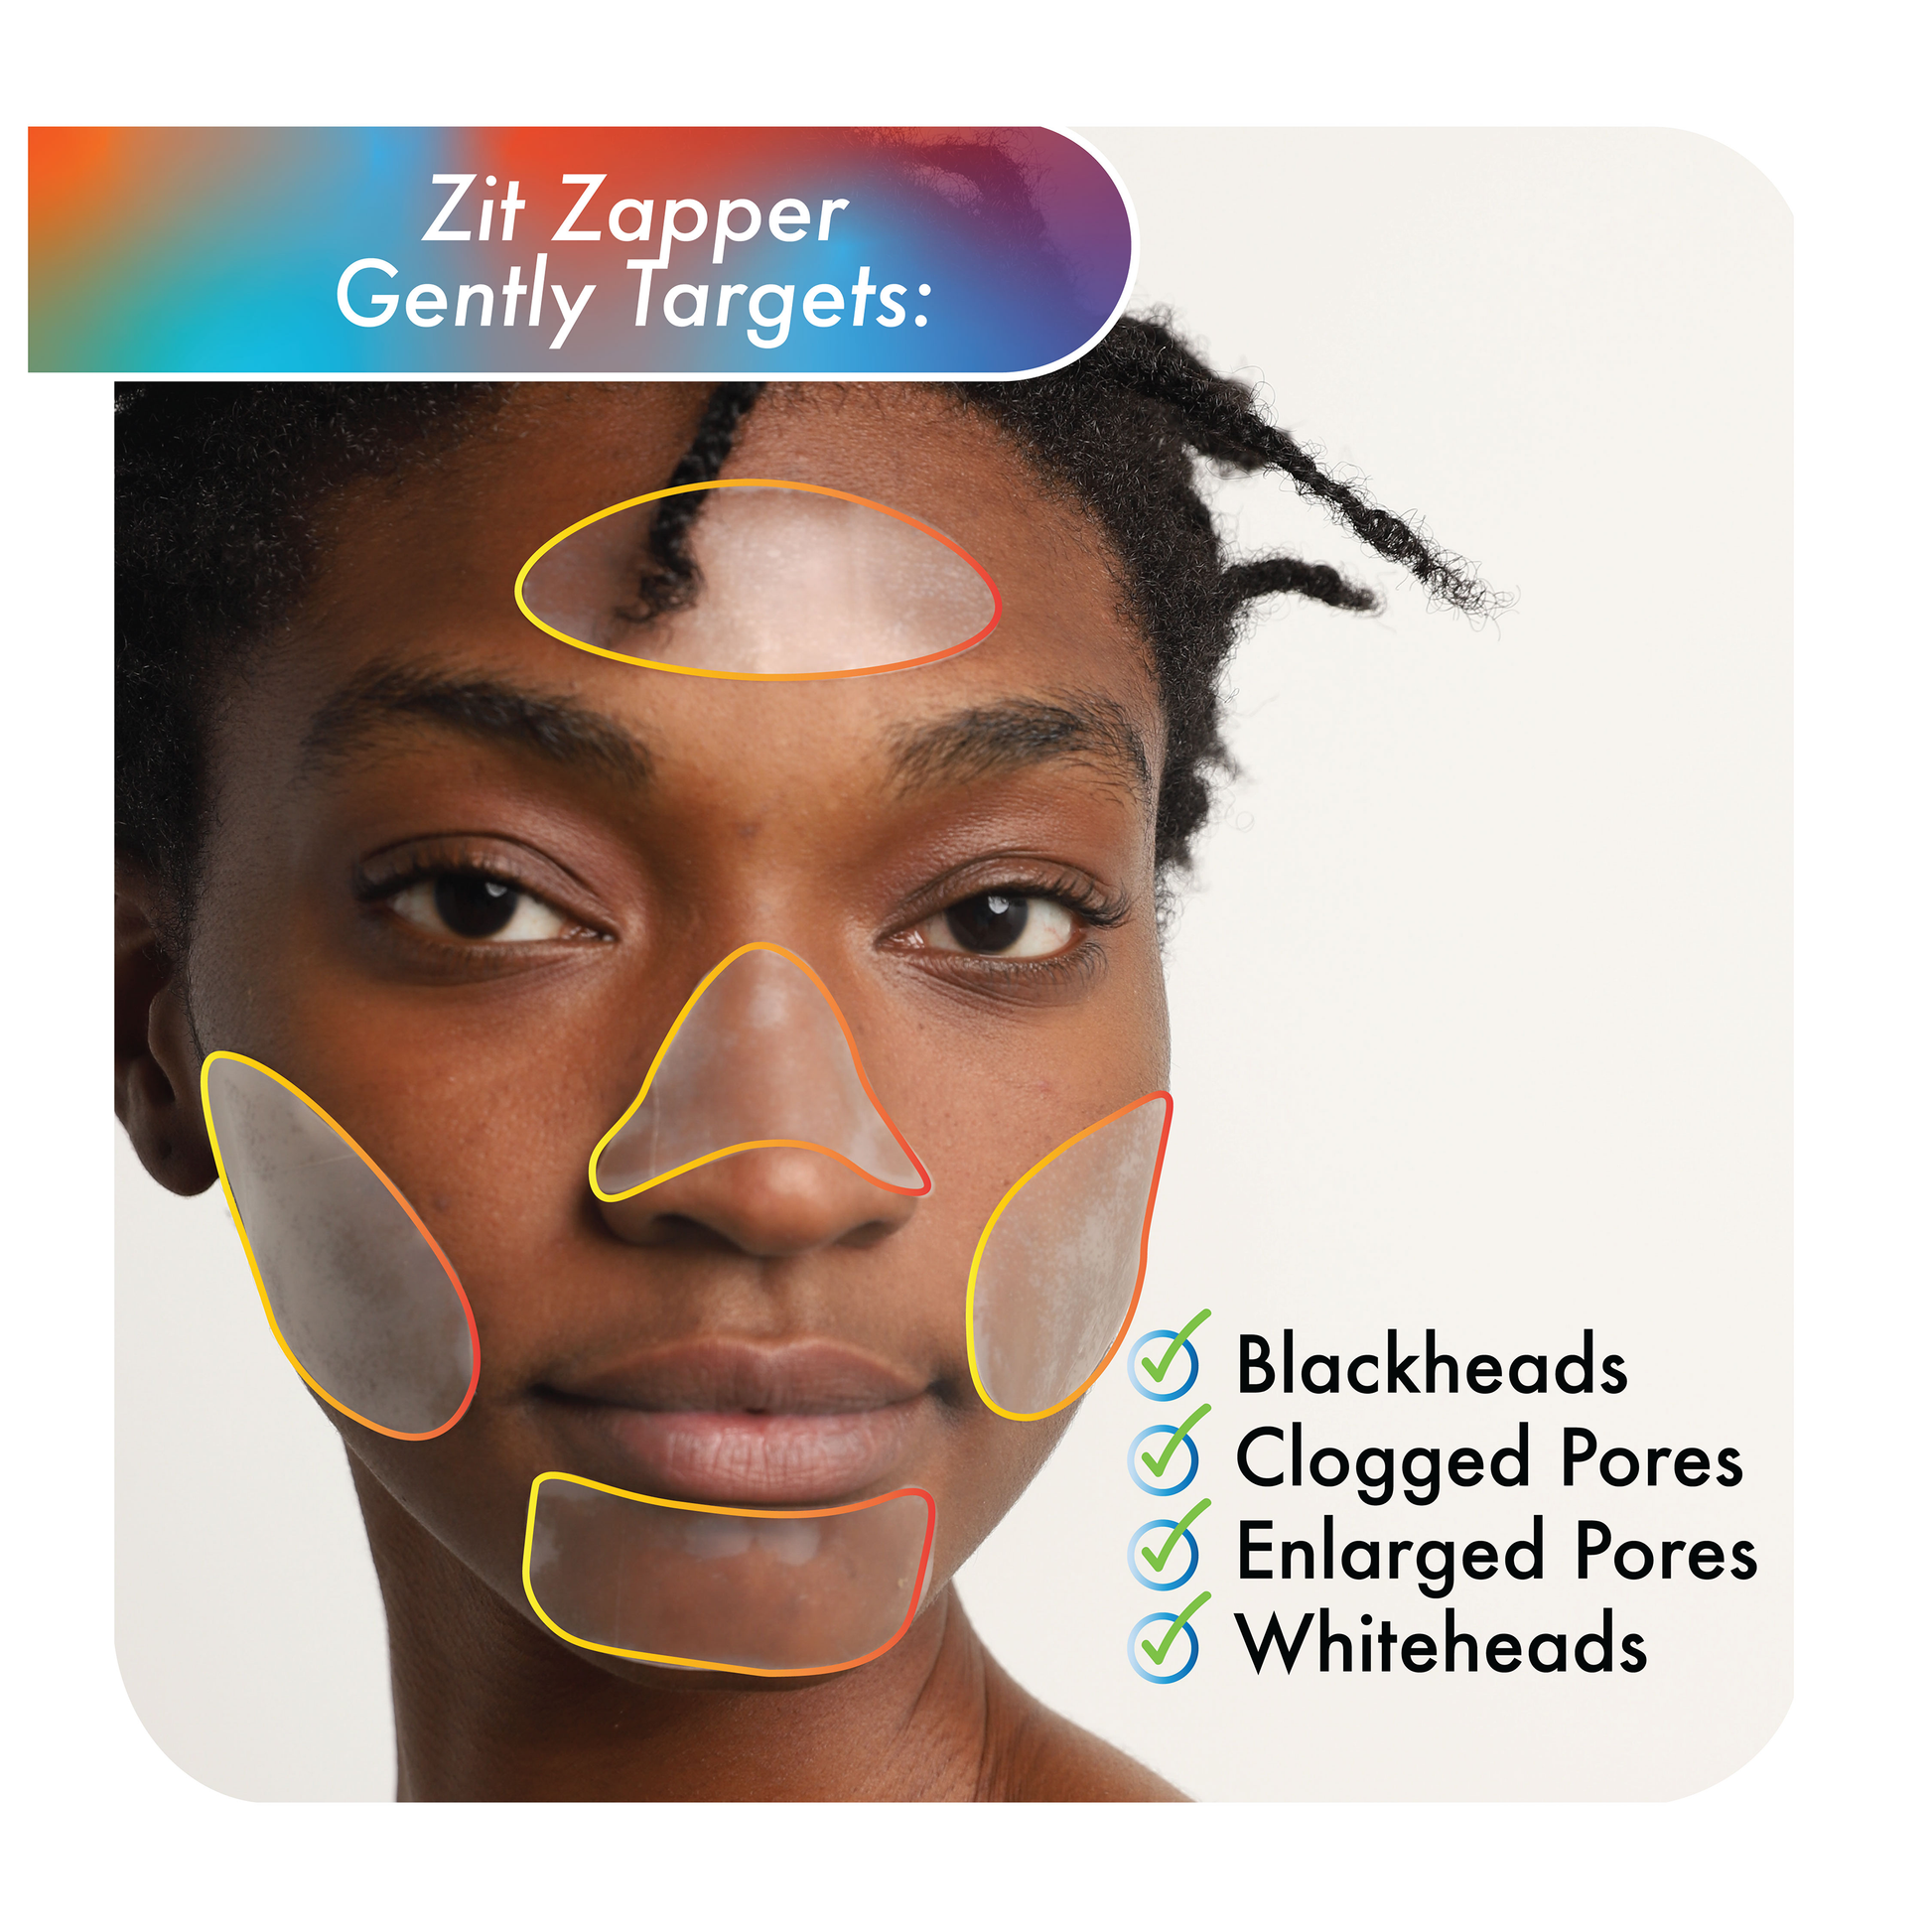 zit zapper targets acne, blackheads and more